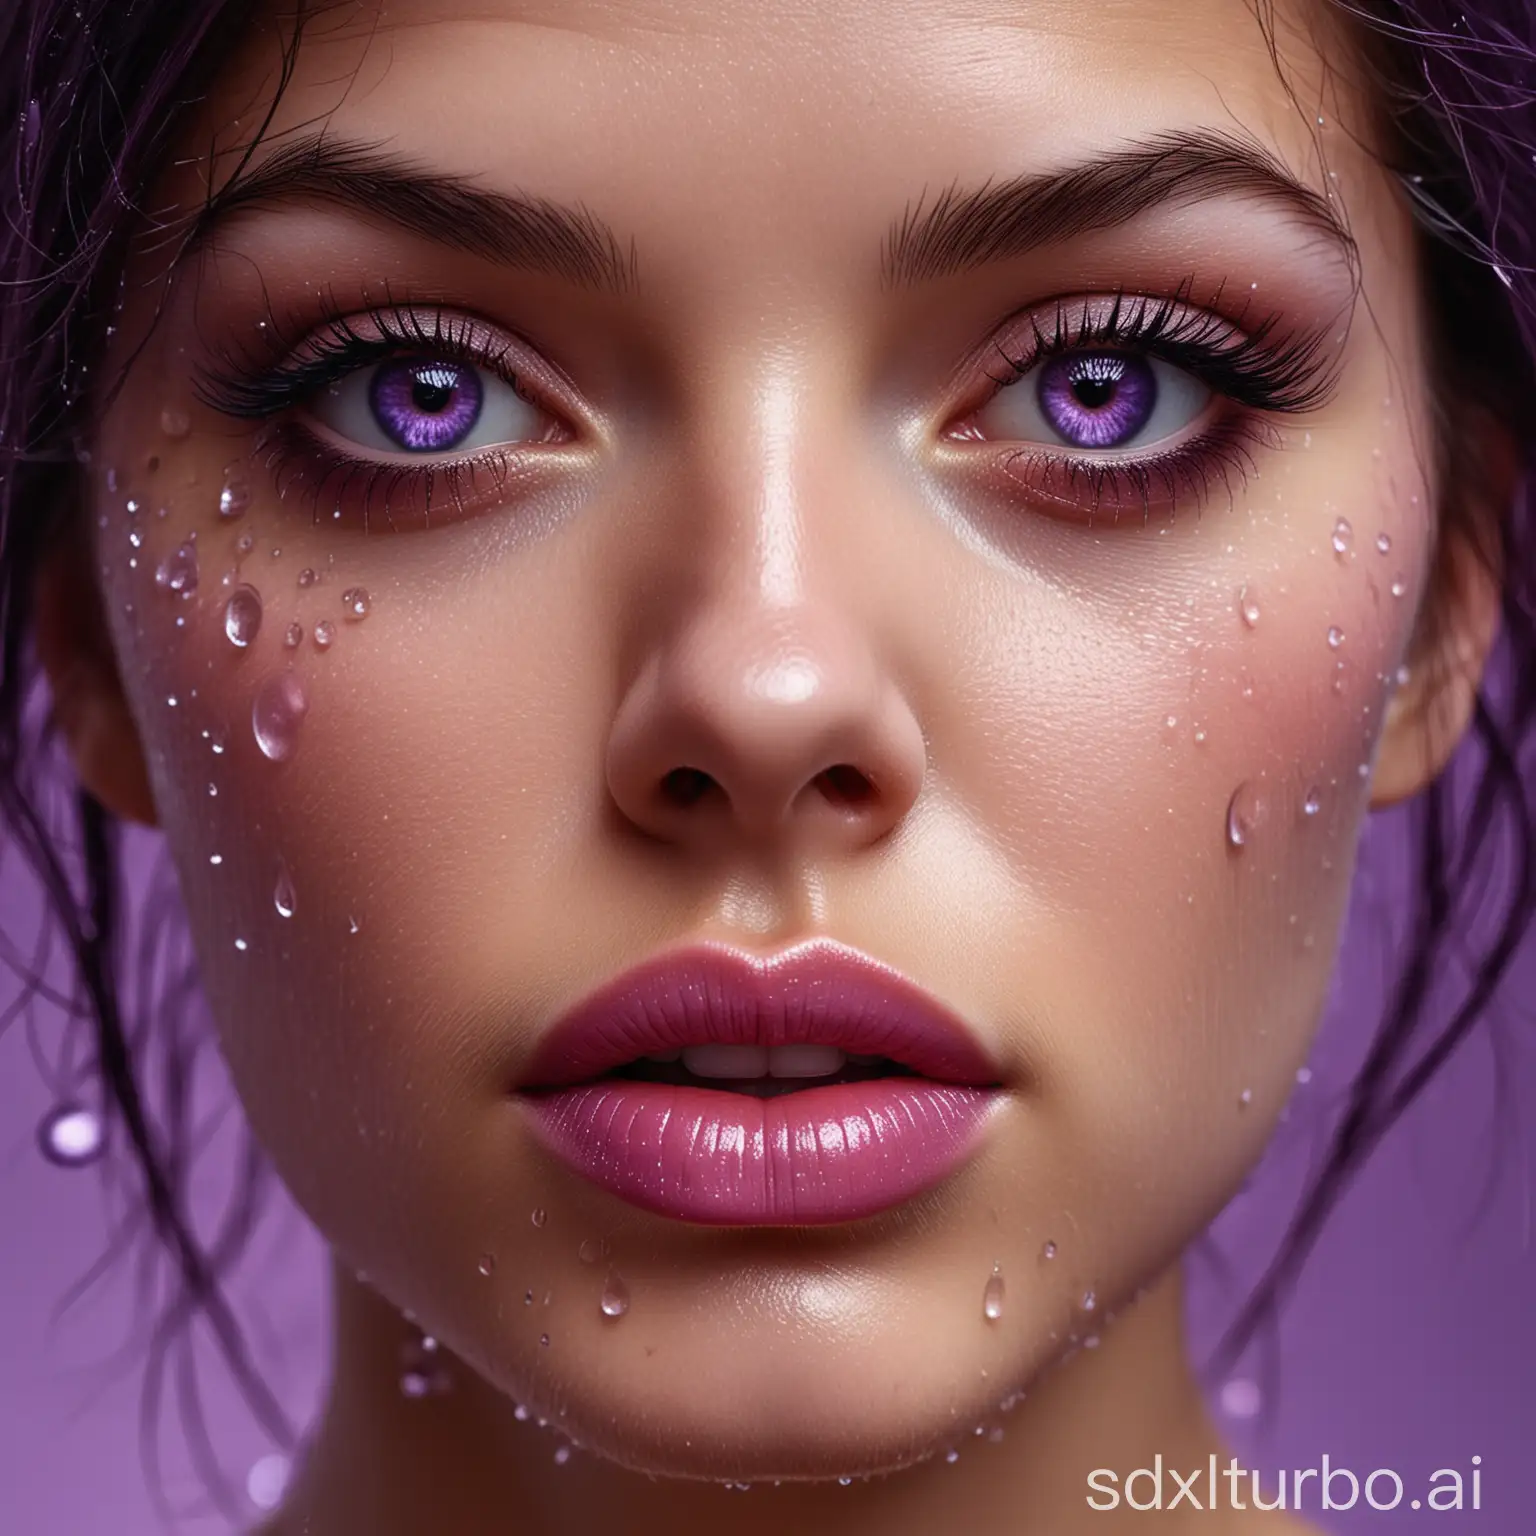 a striking and artistic image of Amber Heart with a highly detailed and vivid portrayal. The focus is on her face which is captured in a close-up view, emphasizing her deep purple eyes and the water droplets on her skin. The image has a strong monochromatic theme, dominated by shades of purple and pink, which adds to its mystical and ethereal quality. The wet hair strands and the shiny texture of her lips also add a realistic and tactile element to the portrait. This kind of image could be used in visual arts to explore themes of beauty and emotion in a fantastical or surreal context.